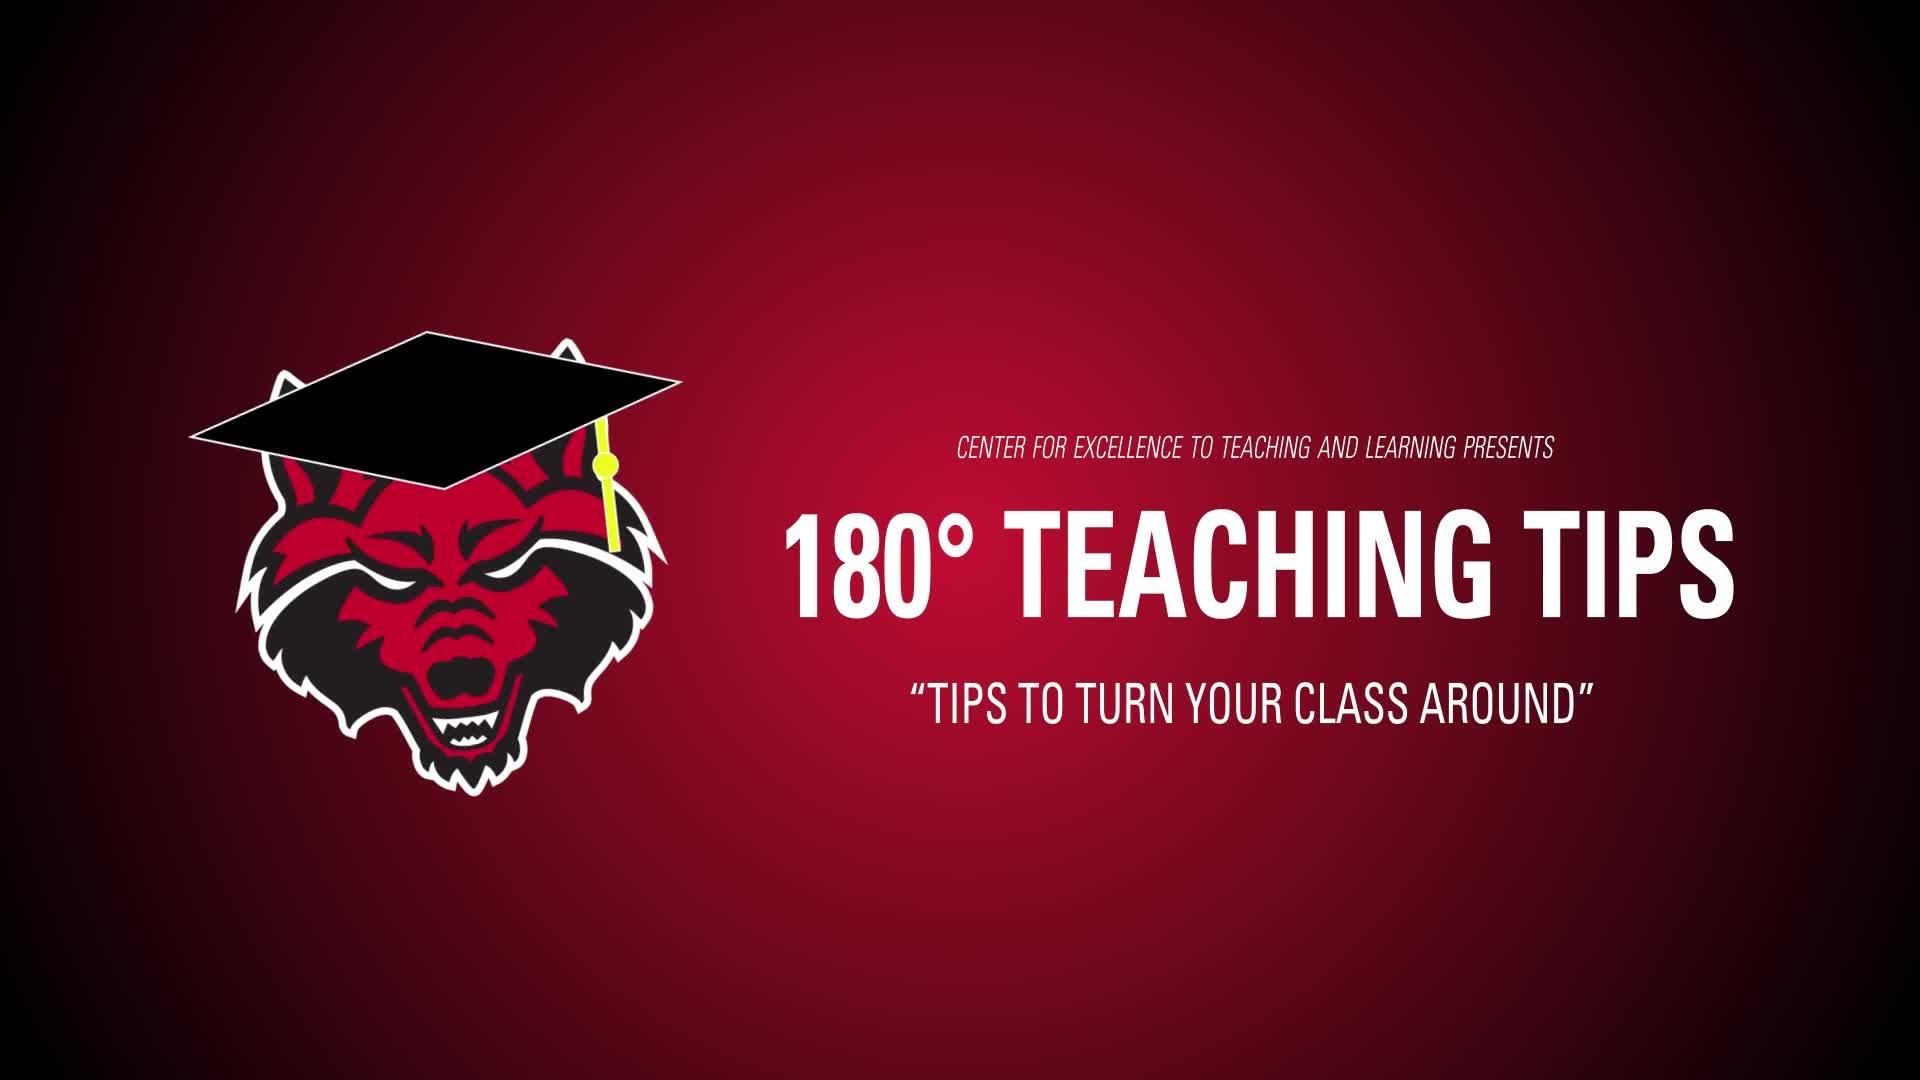 180 Teaching Tips - Tips to turn your class around